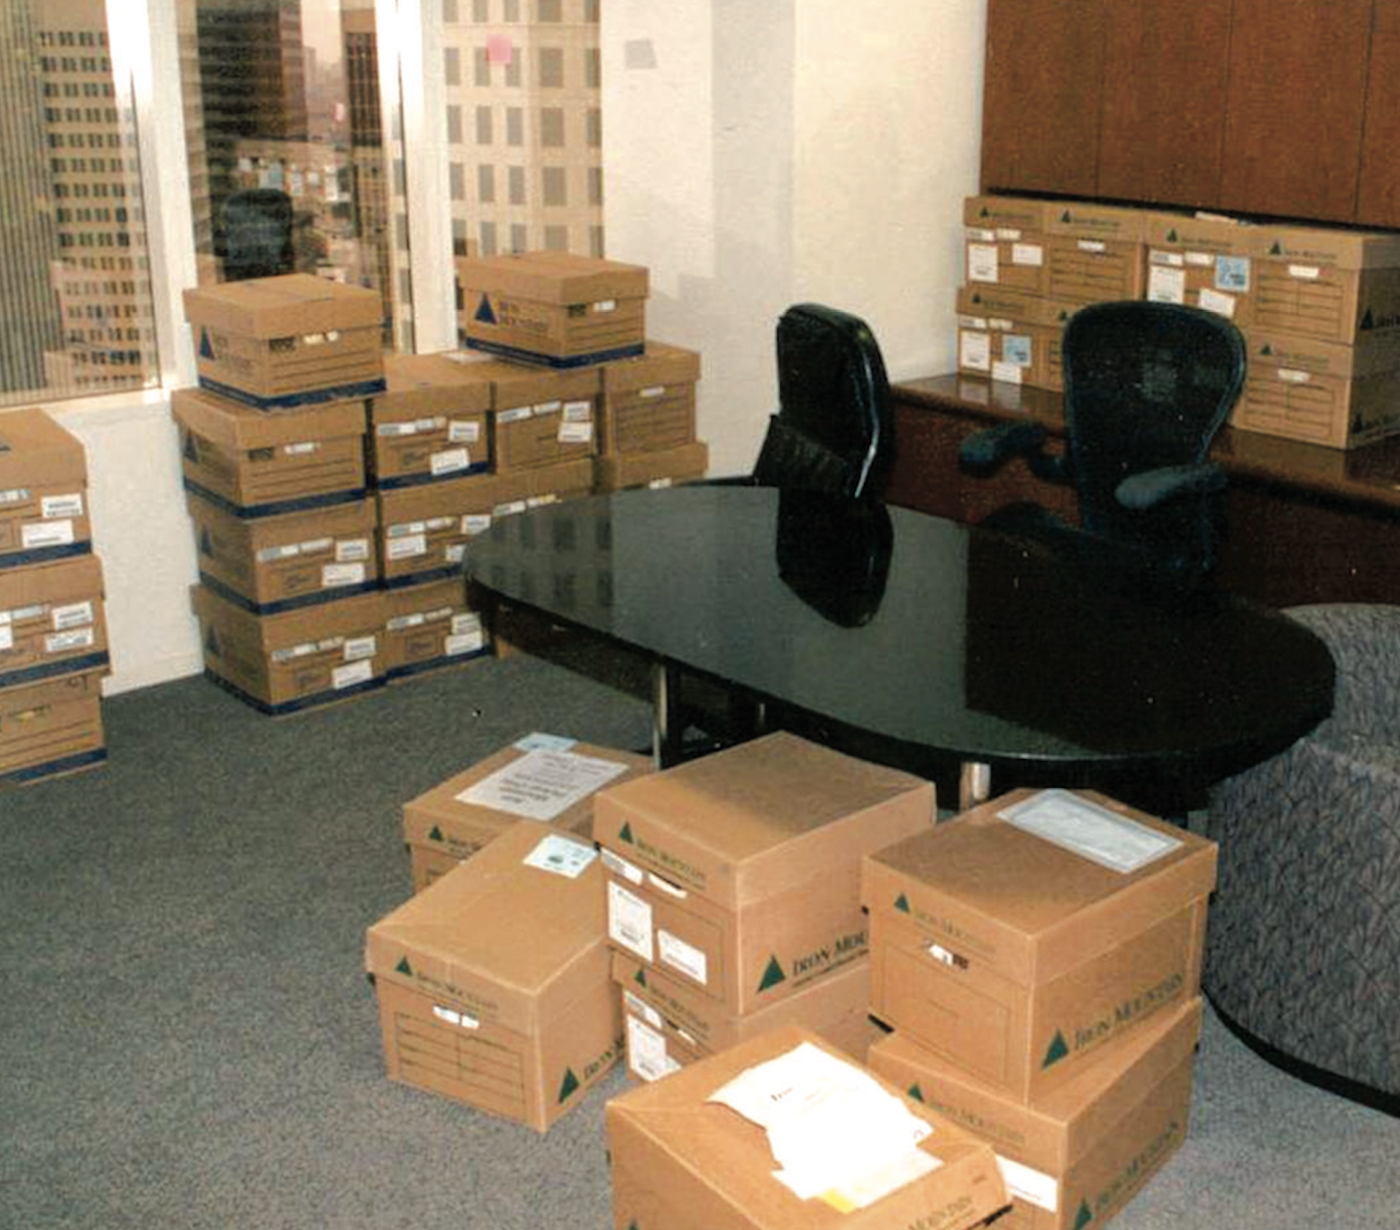 Boxes of evidence in an office at Enron headquarters in Houston in 2002. More than 3,000 boxes of evidence and more than four terabytes of digitized data were collected by FBI agents in the weeks after Enron declared bankruptcy on December 2, 2001.